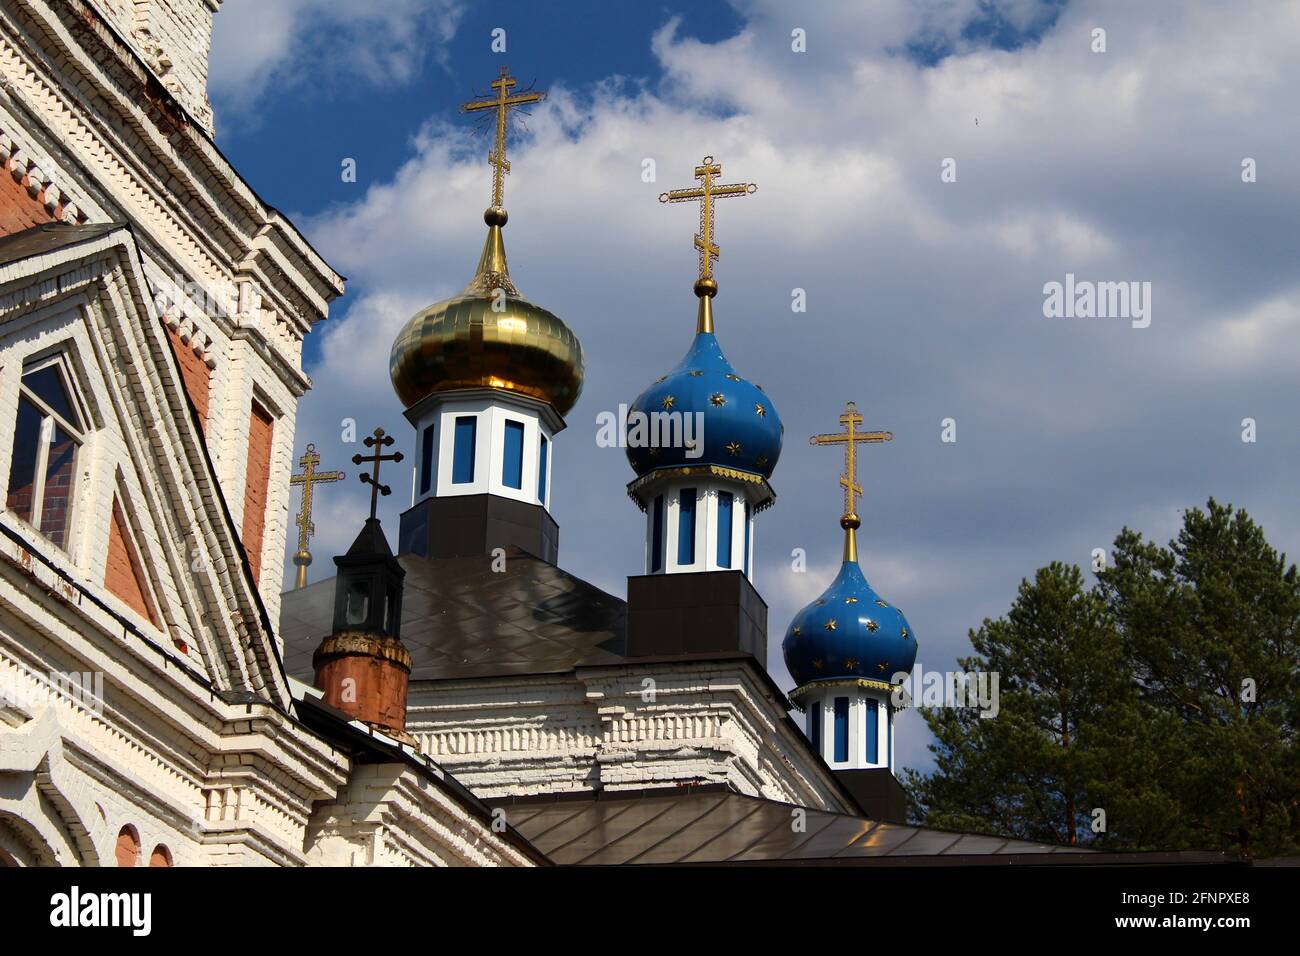 Domes of the Russian orthodox church in Zarechye village, Moscow Region, Central Russia Stock Photo